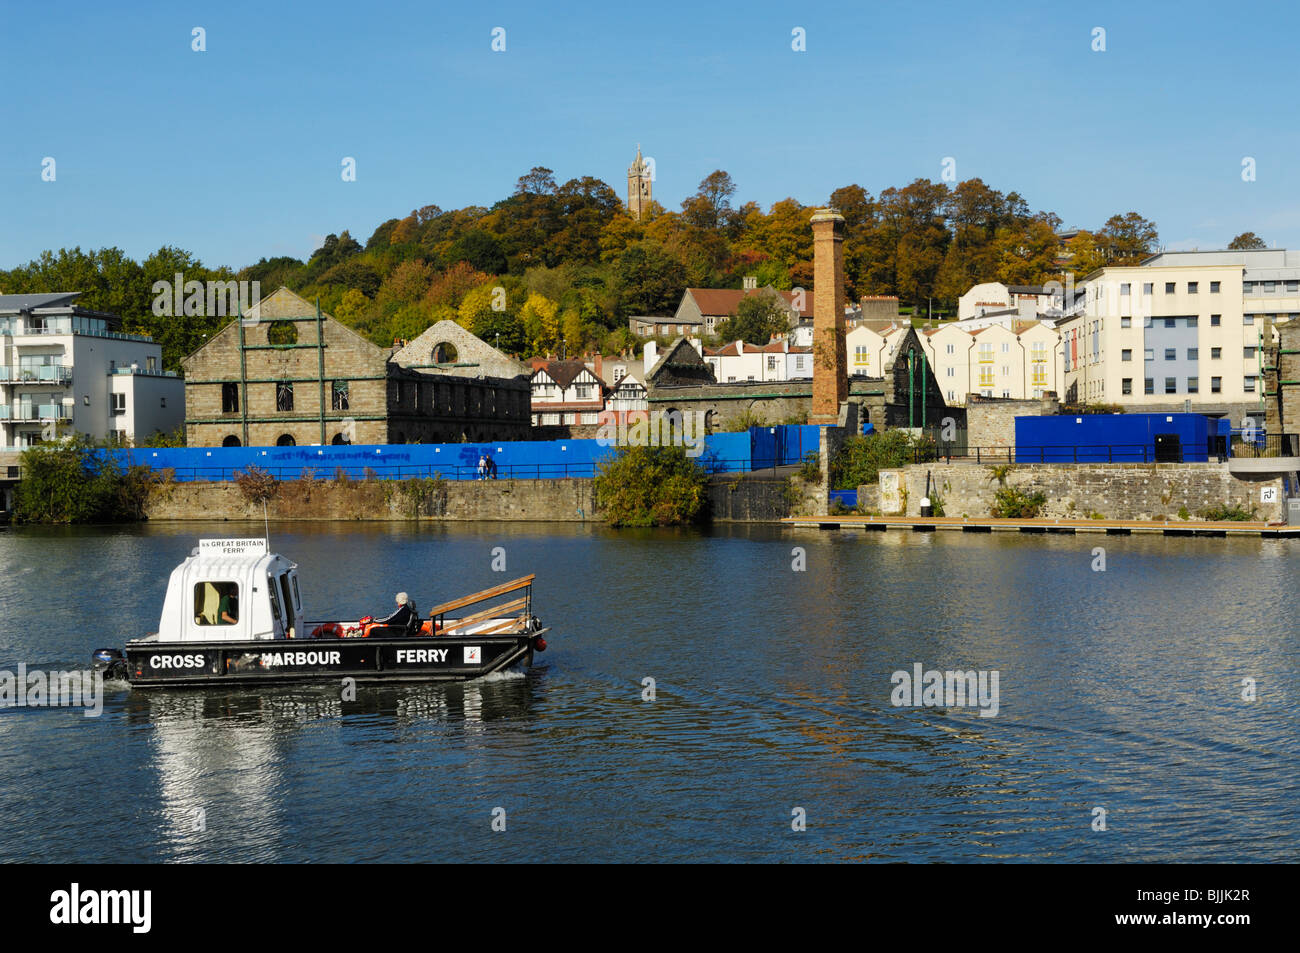 The Cross Harbour Ferry by Porto Quay in the Floating Harbour, Bristol, England. Cabot Tower is visible on Brandon Hill behind. Stock Photo